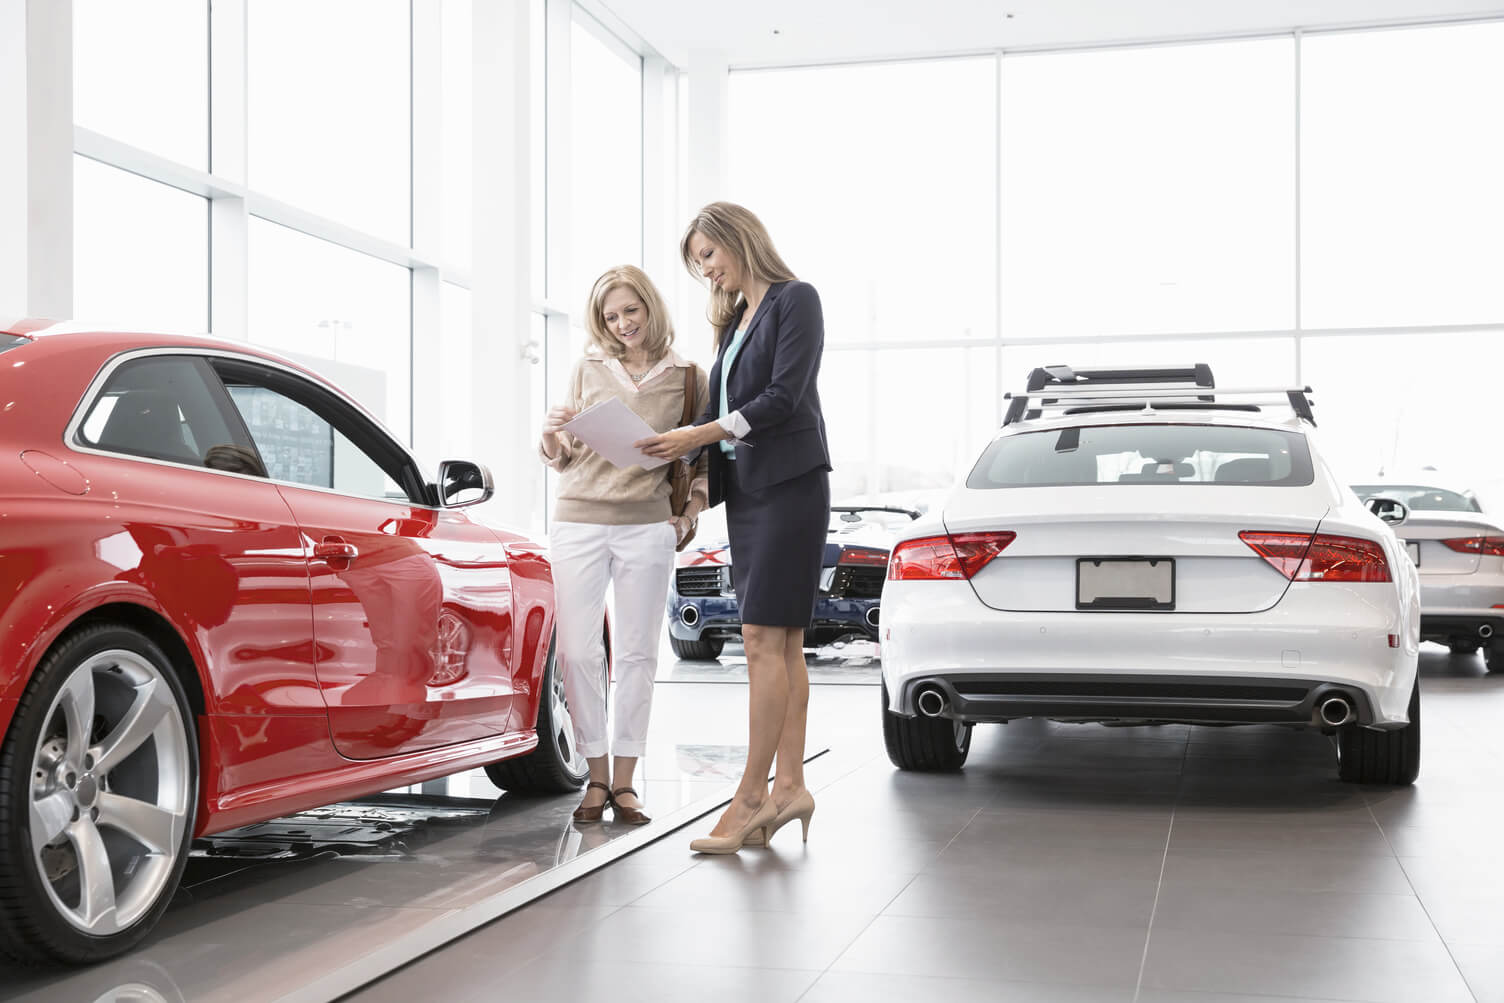 The Safety Checklist: What to Inspect When Buying a Used Car